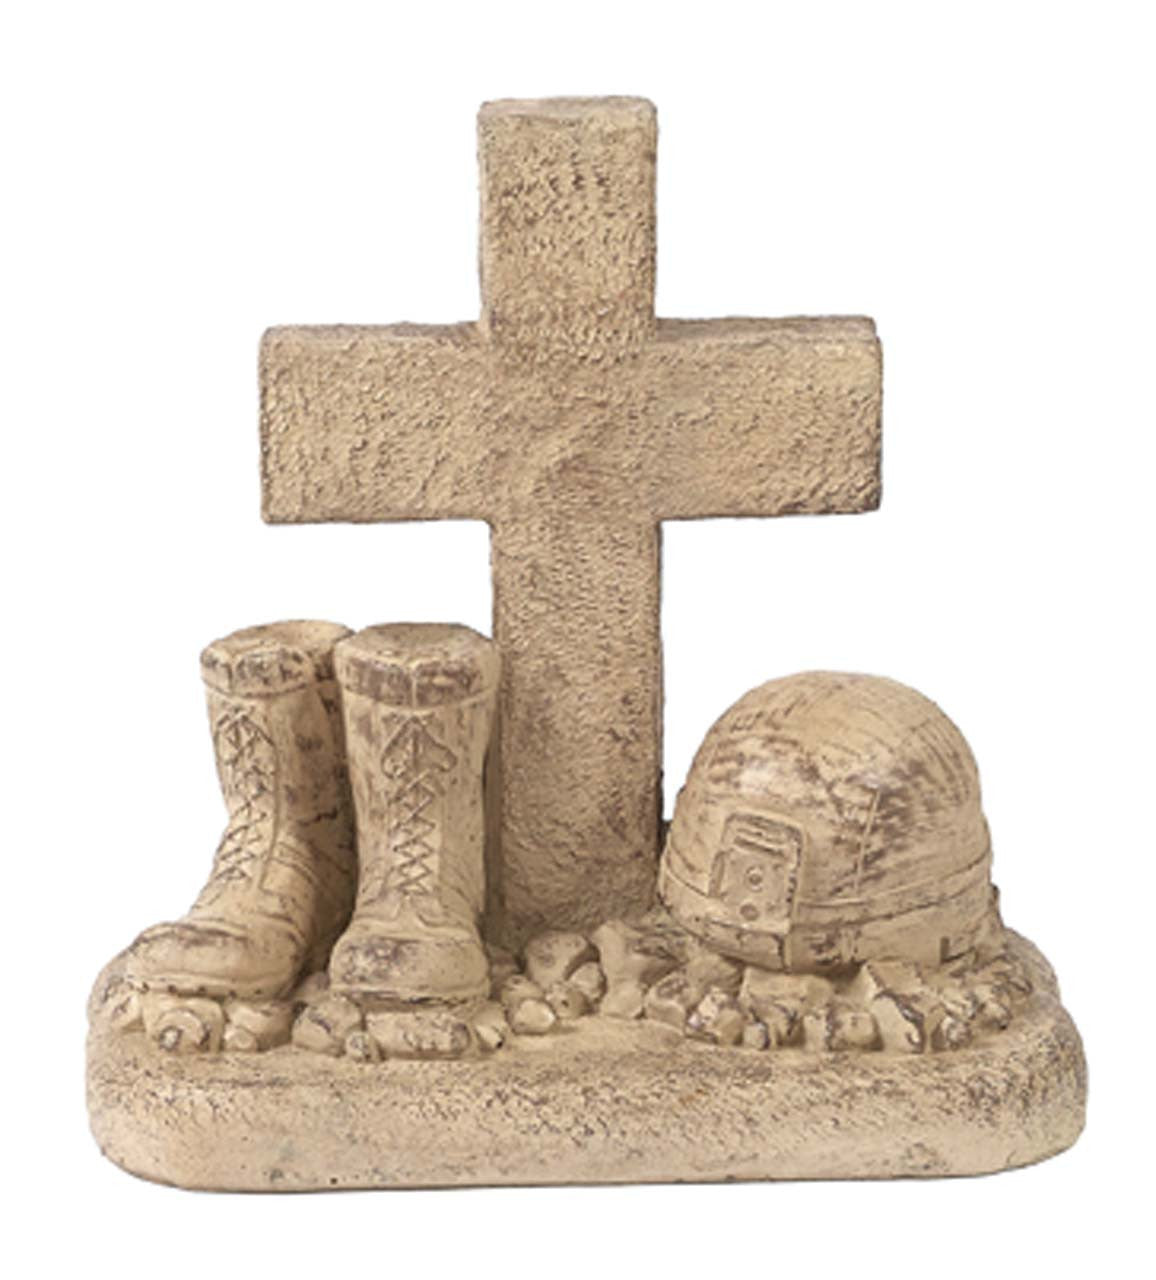 Statuary Soldier Boots & Helmet at Cross